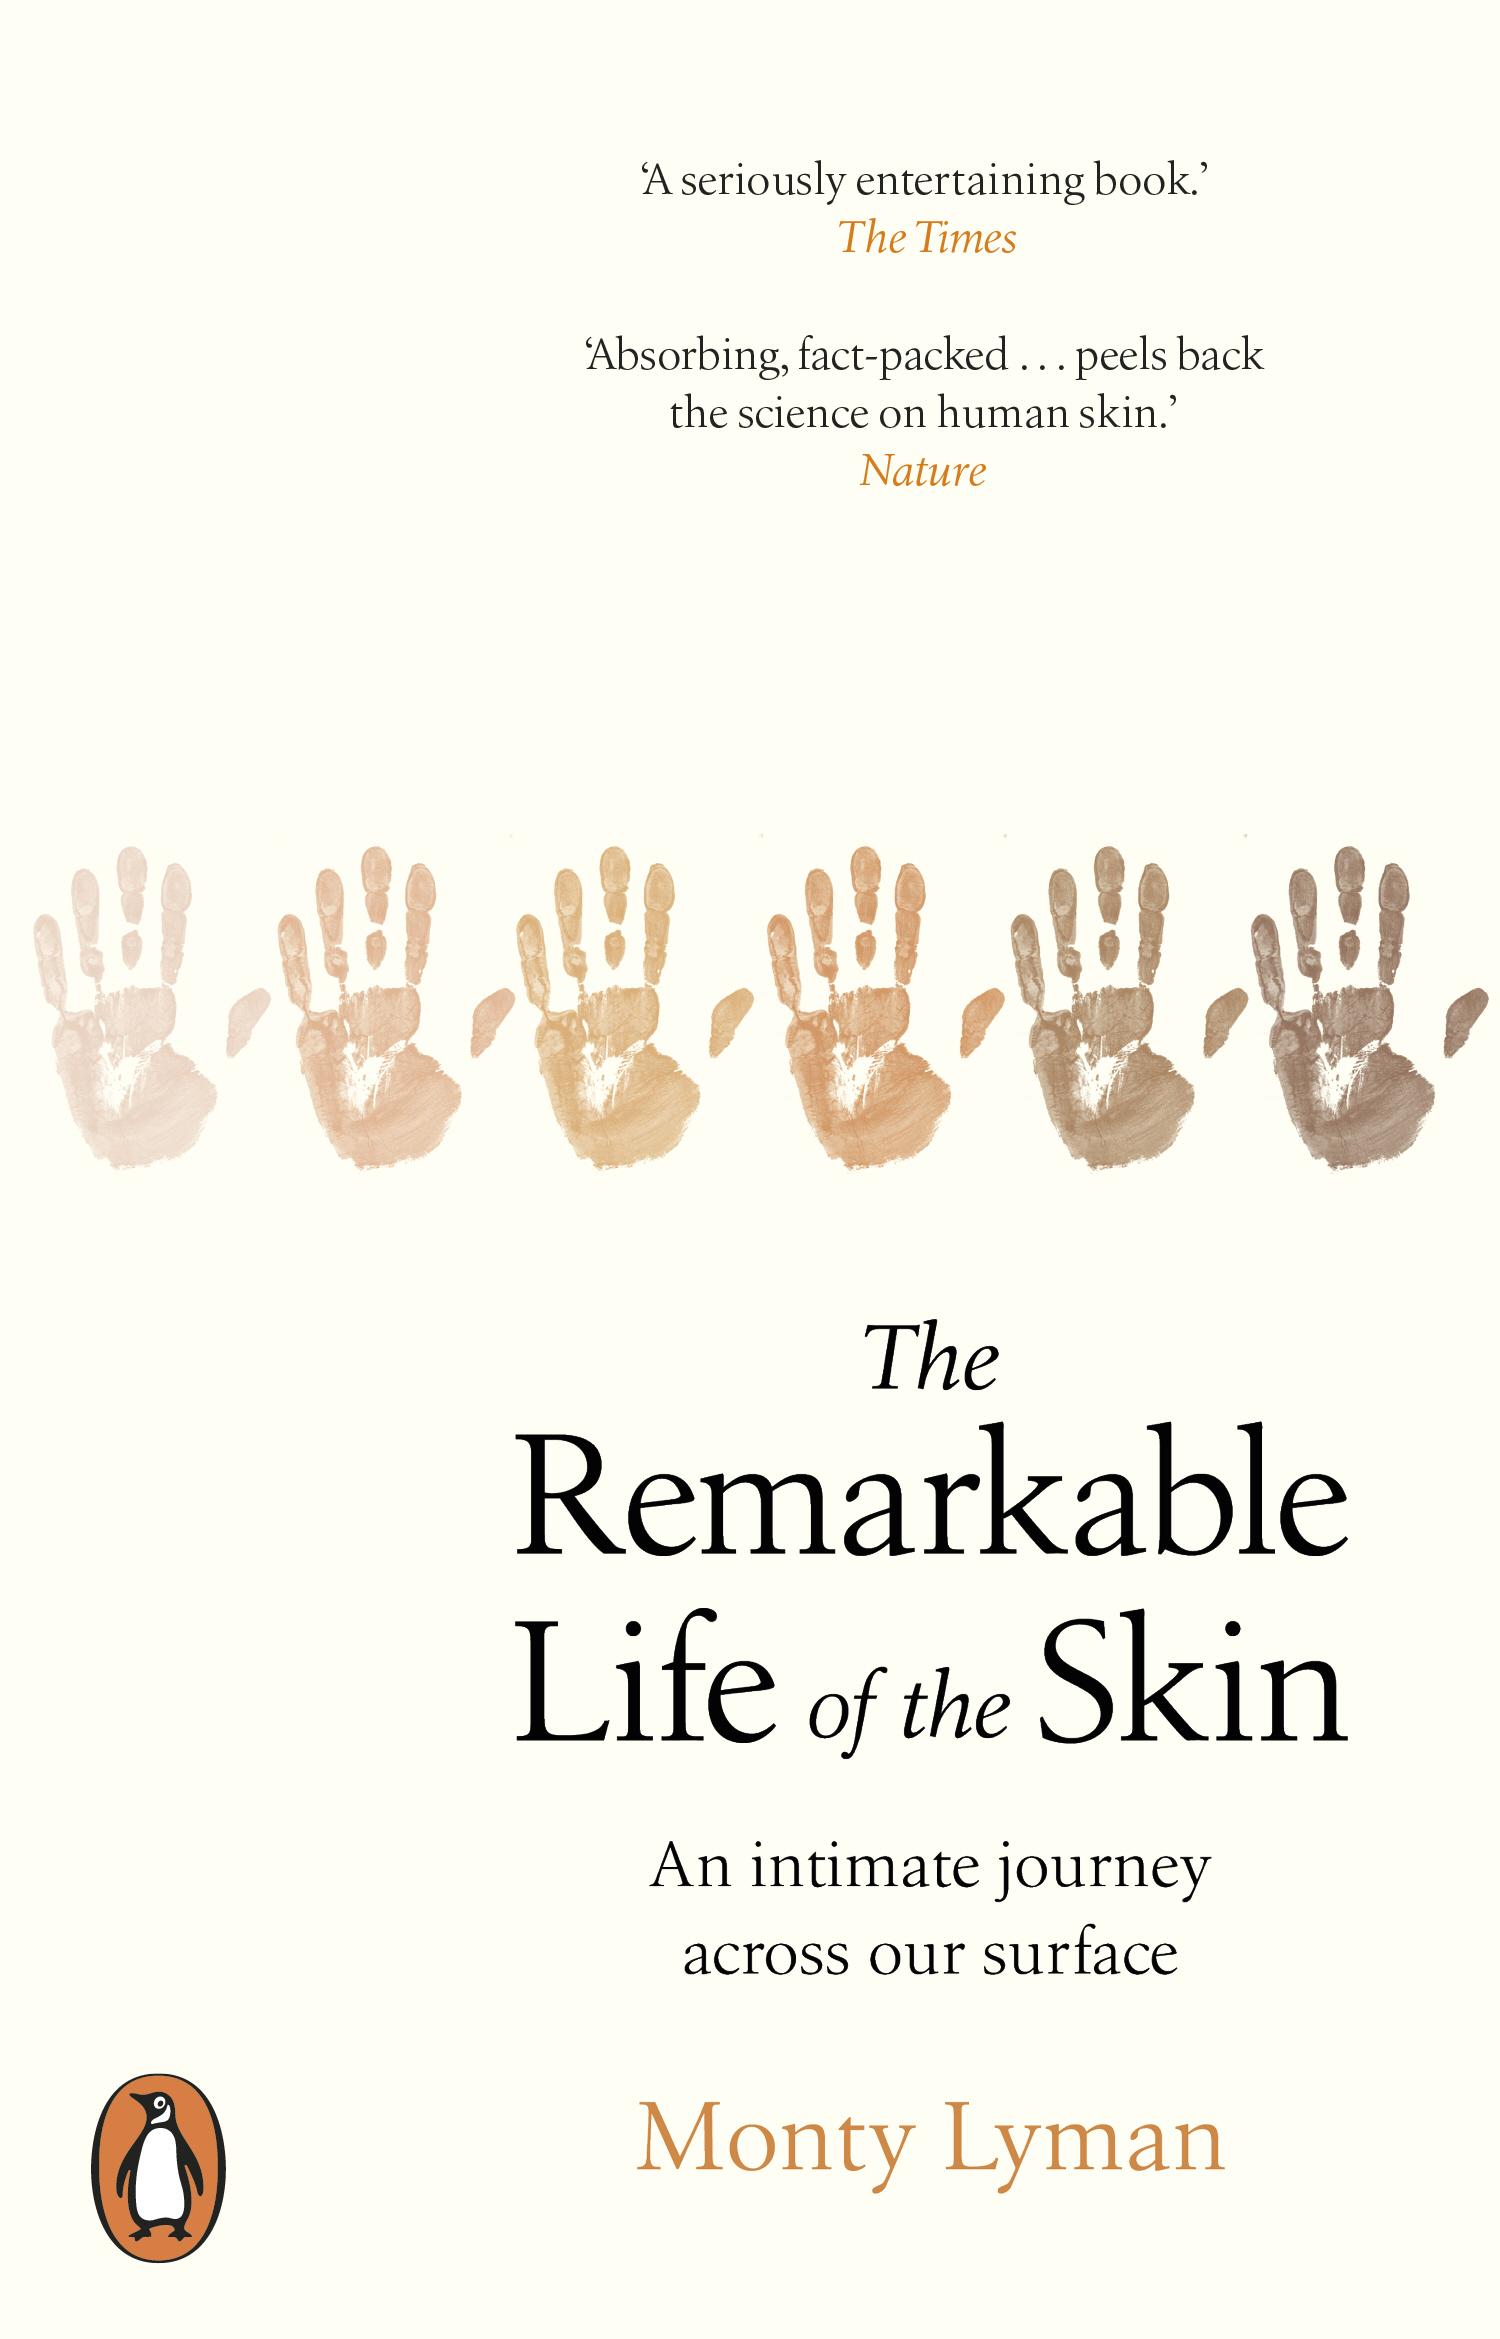 Remarkable Life of the Skin - Monty Lyman